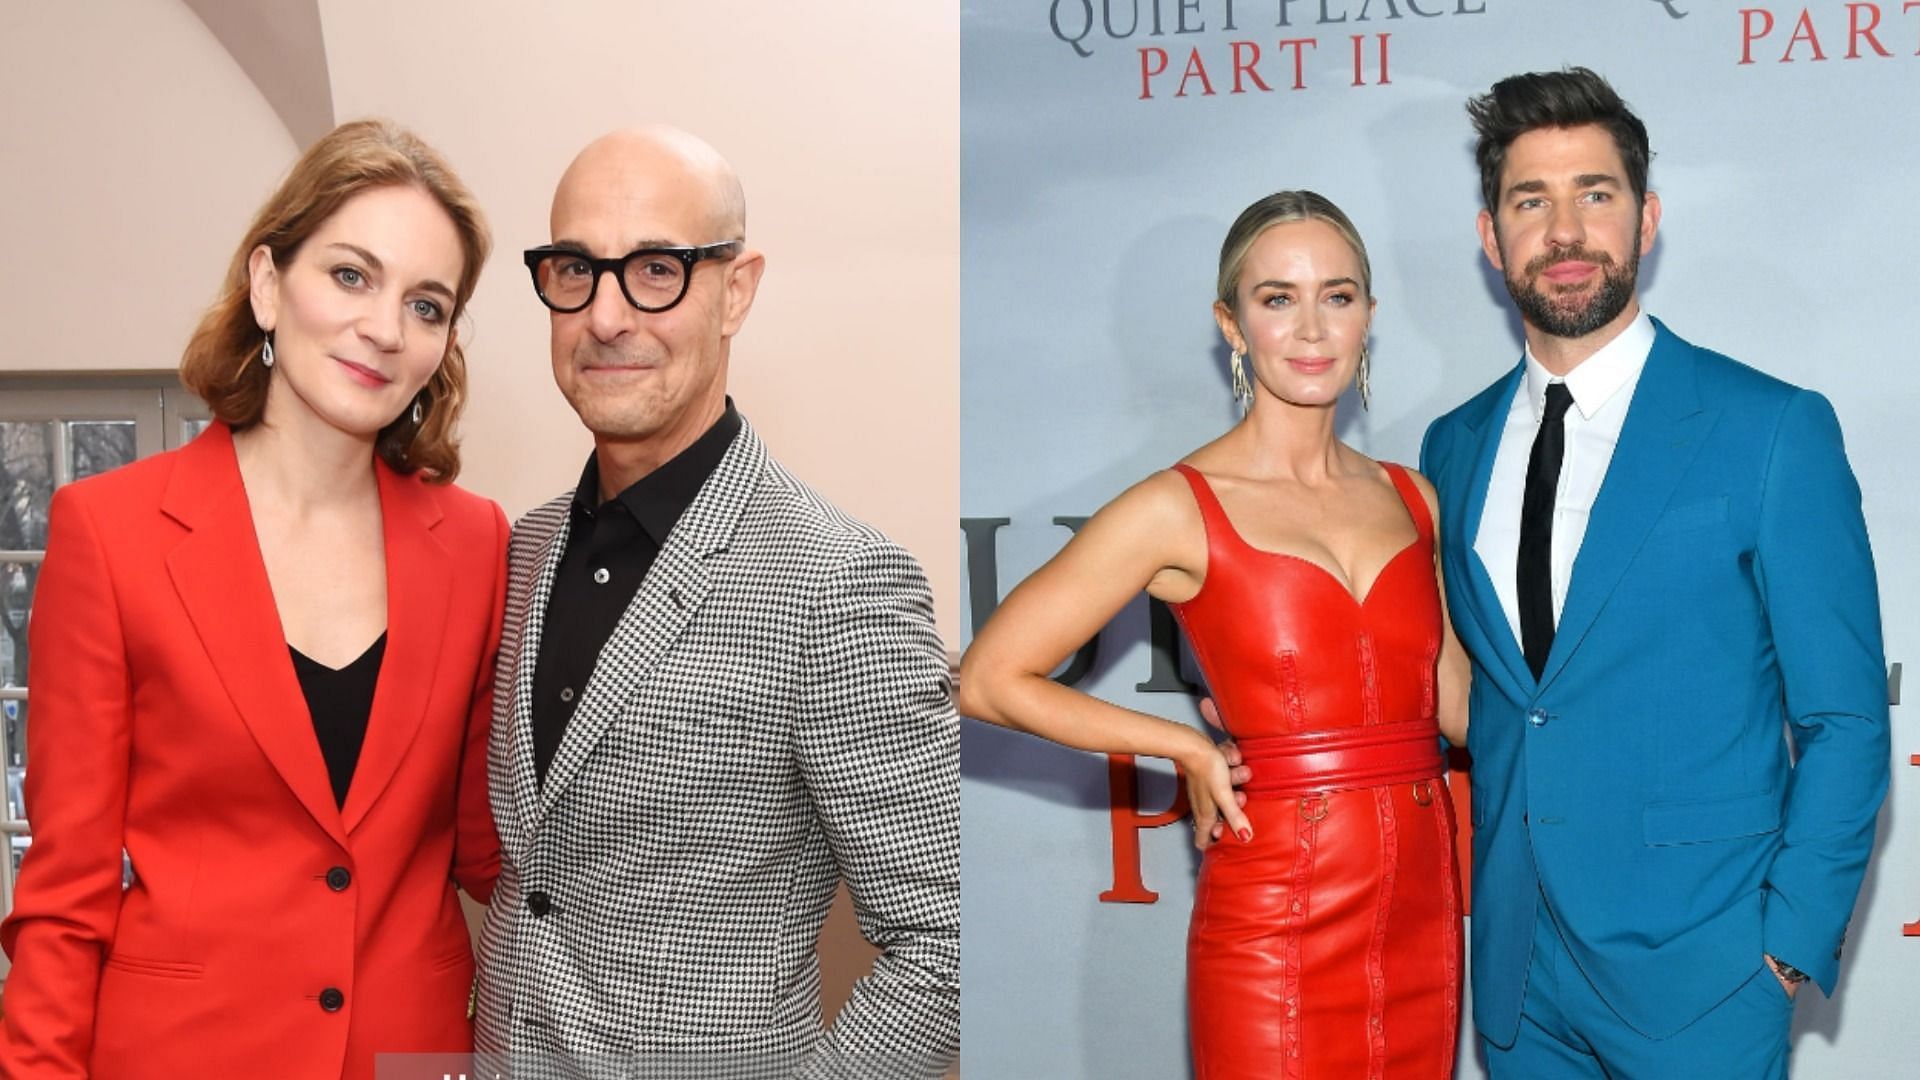 Stanley Tucci and John Krasinski are related through their wives (Image via Getty Images/David M. Benett/Mike Coppola)